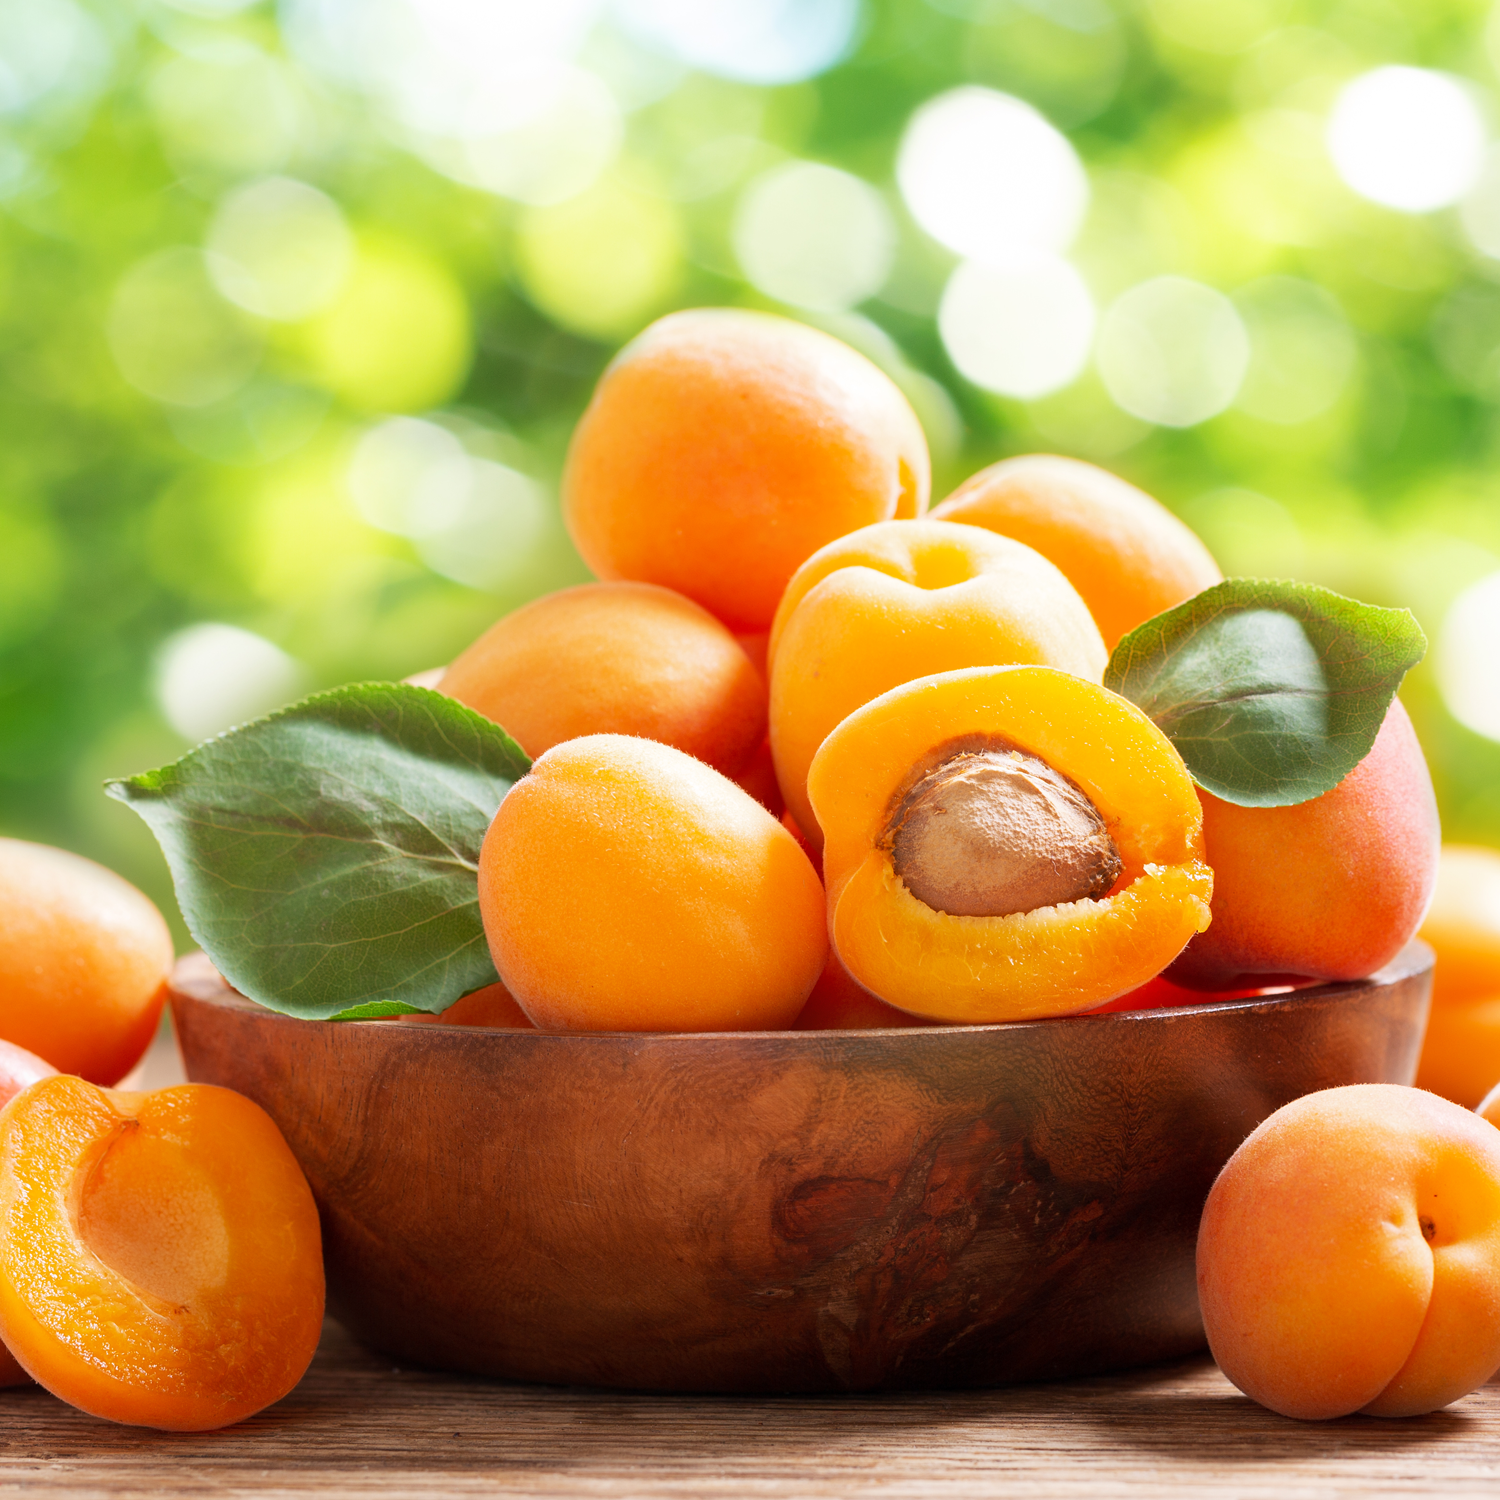 A still life photo of  fresh apricots - one of the fragrance notes found in the "Citrus Sunrise" scented candle from Tuscany Candle